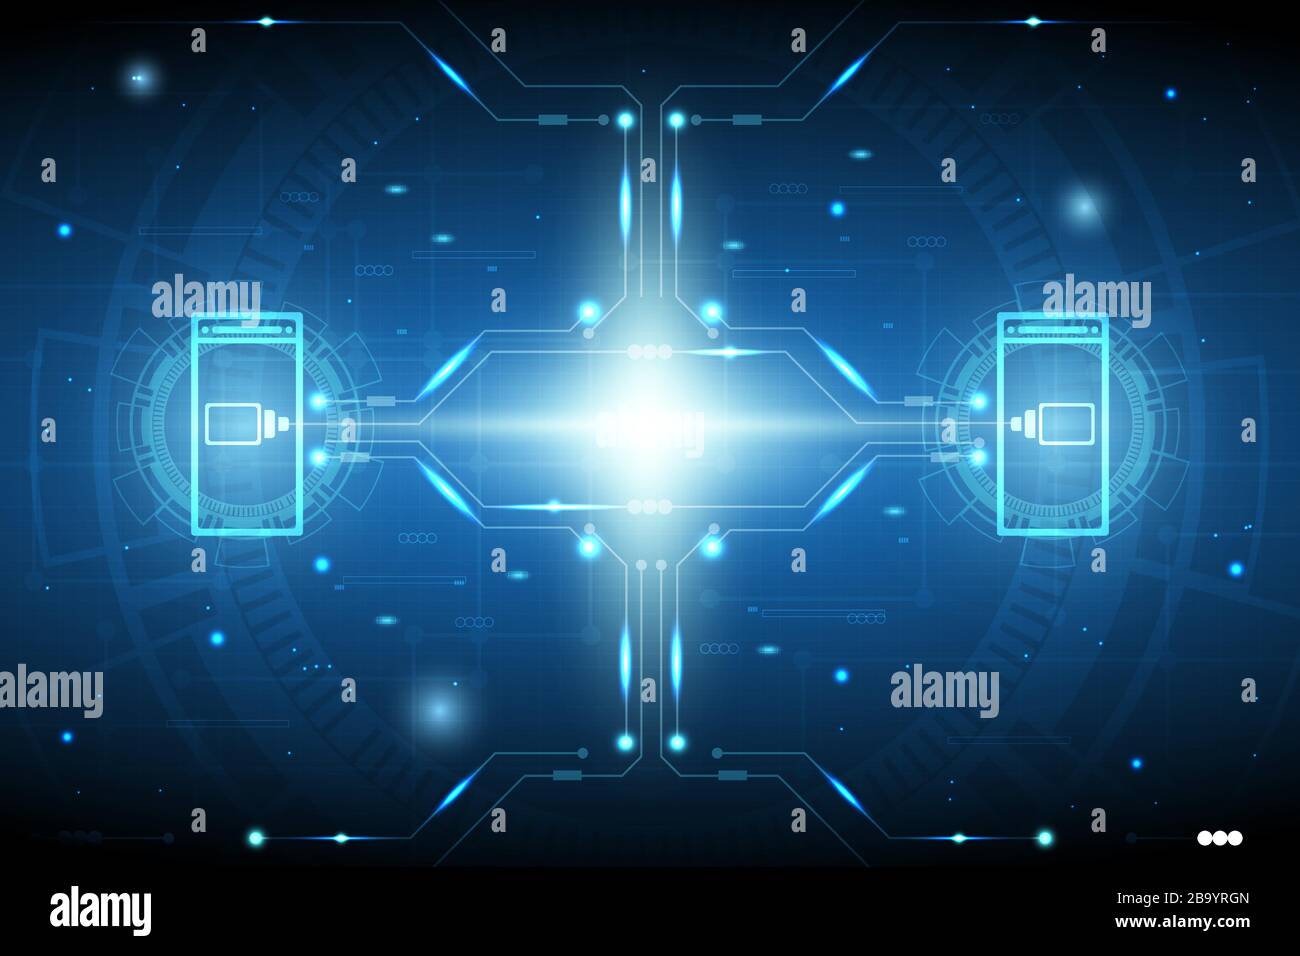 Concept technology background with glowing mobile phone and battery icon, circuit pattern and sparkle effect. Stock Vector